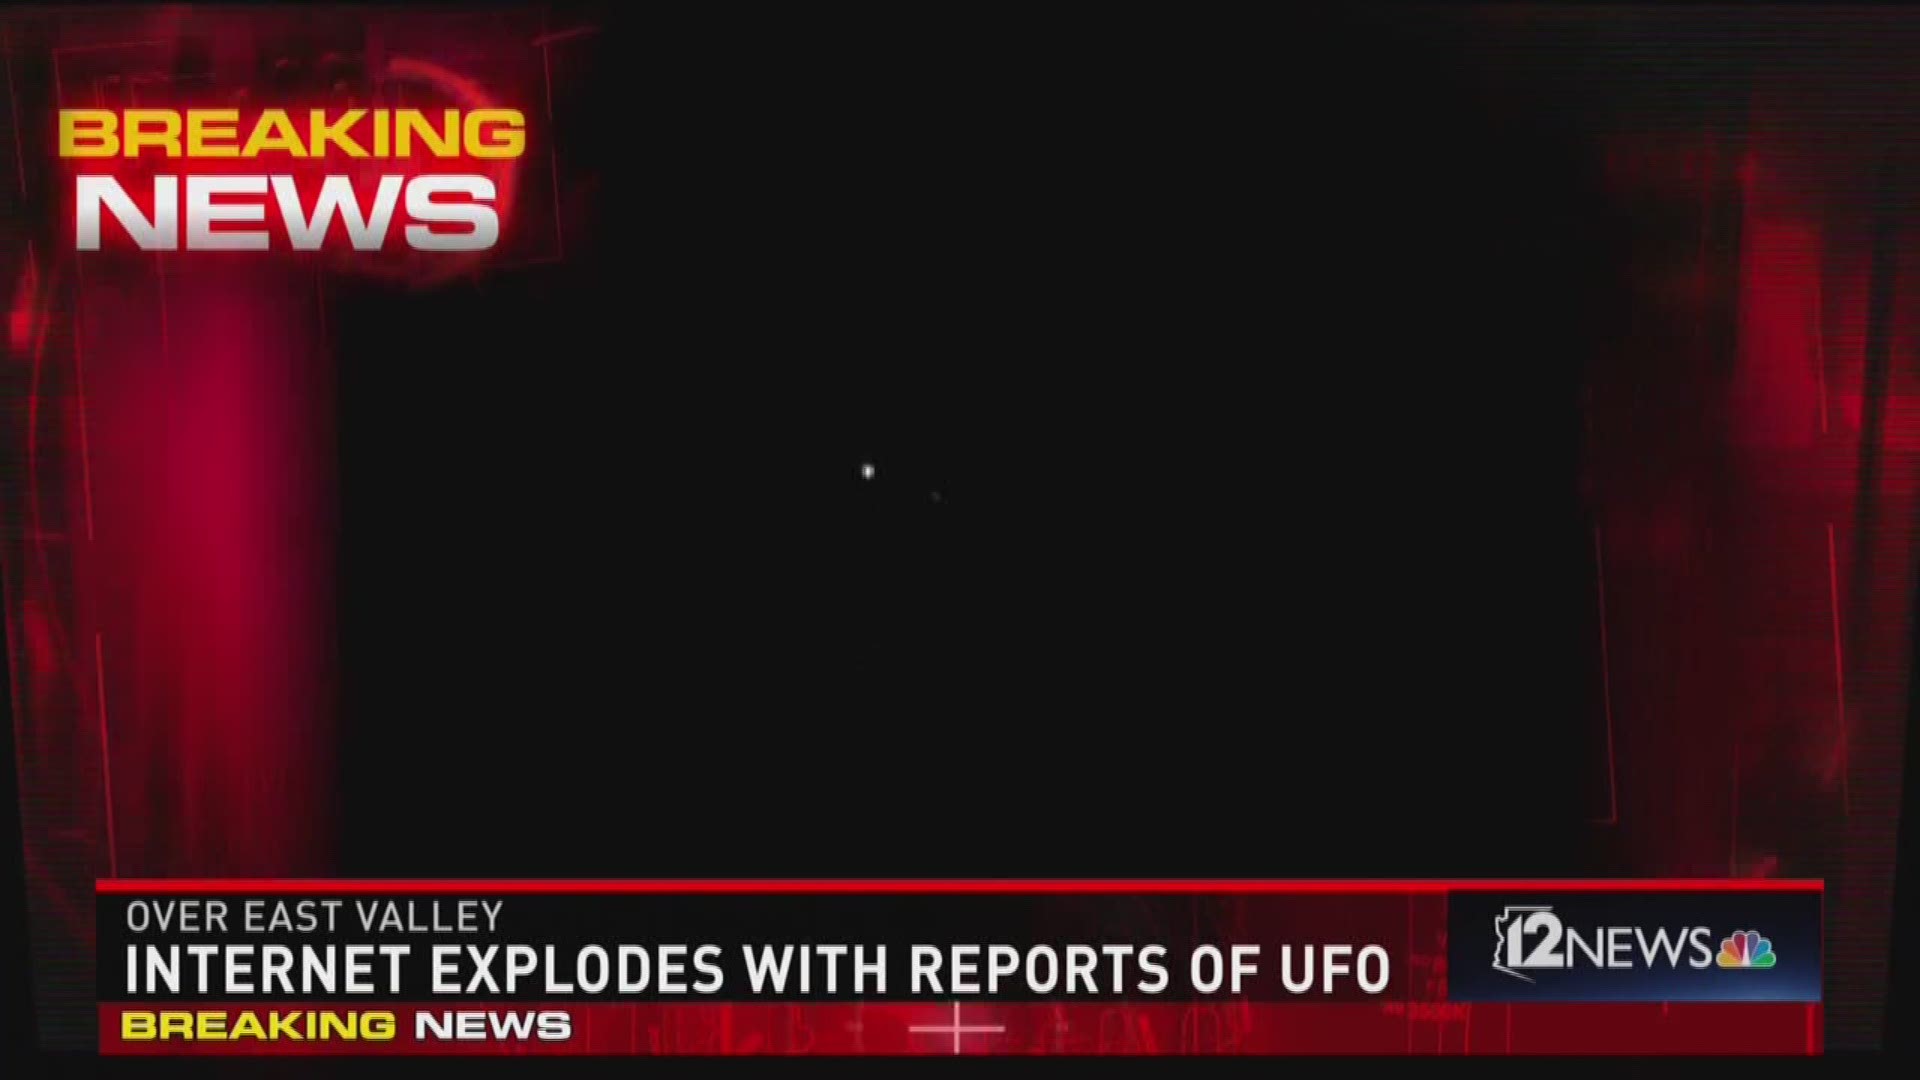 Internet explodes with reports of UFO.